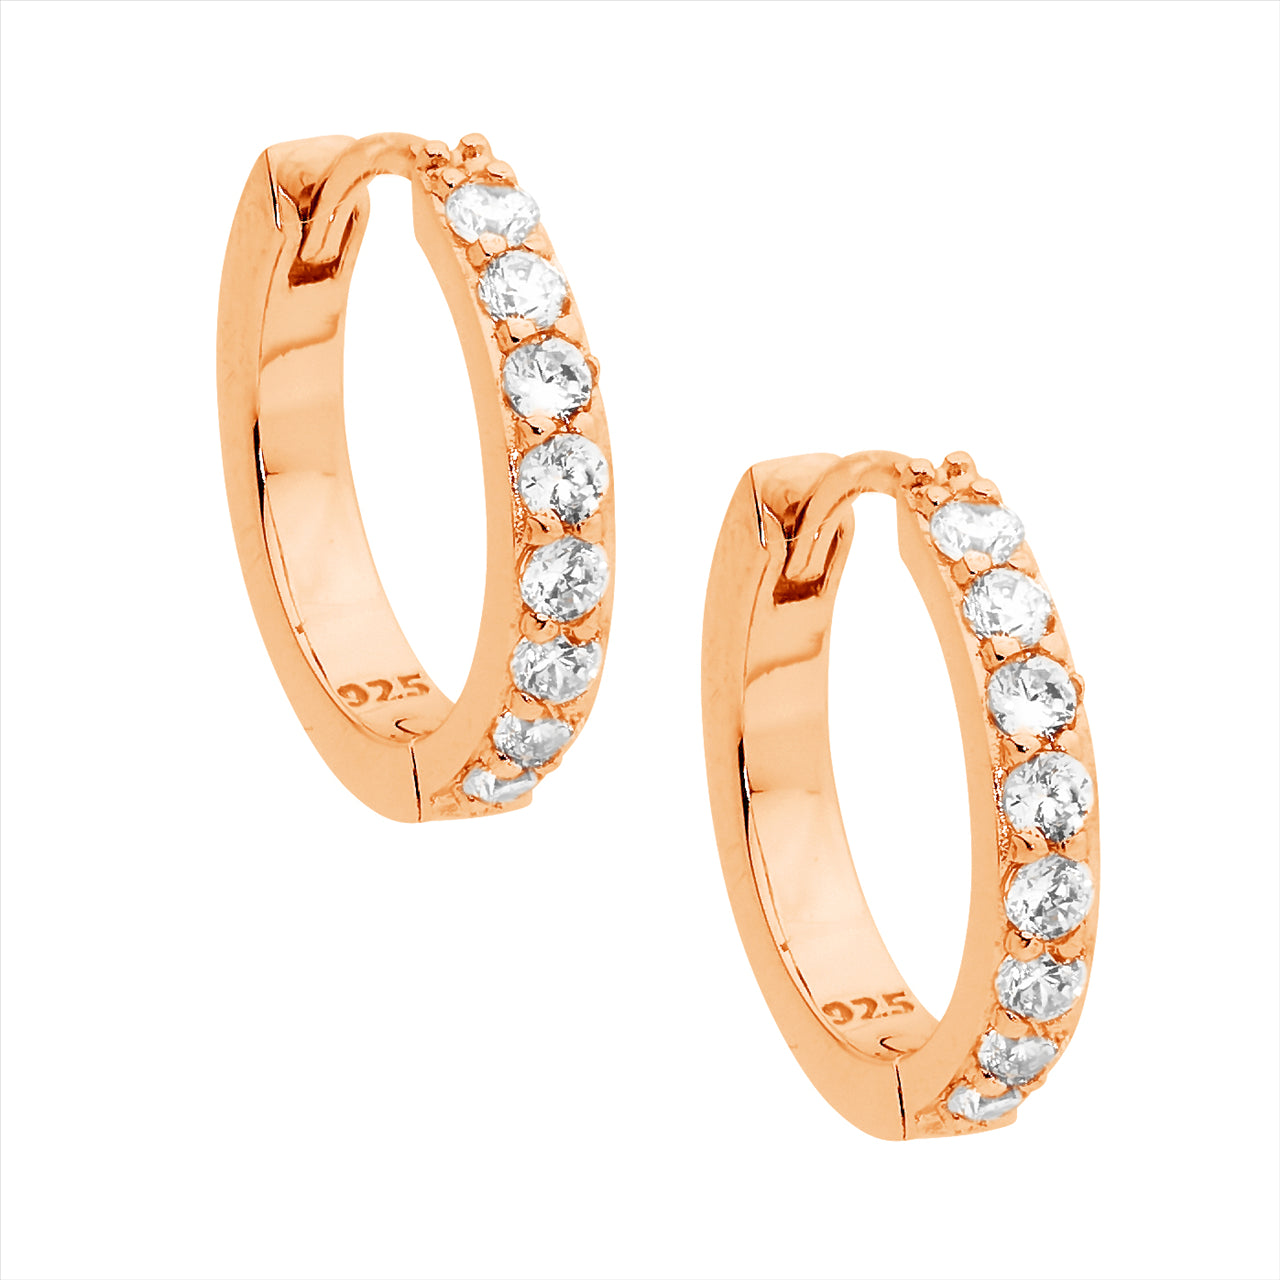 SS WH CZ Single Row 15mm Hoop Earrings w/ Rose Gold Plating